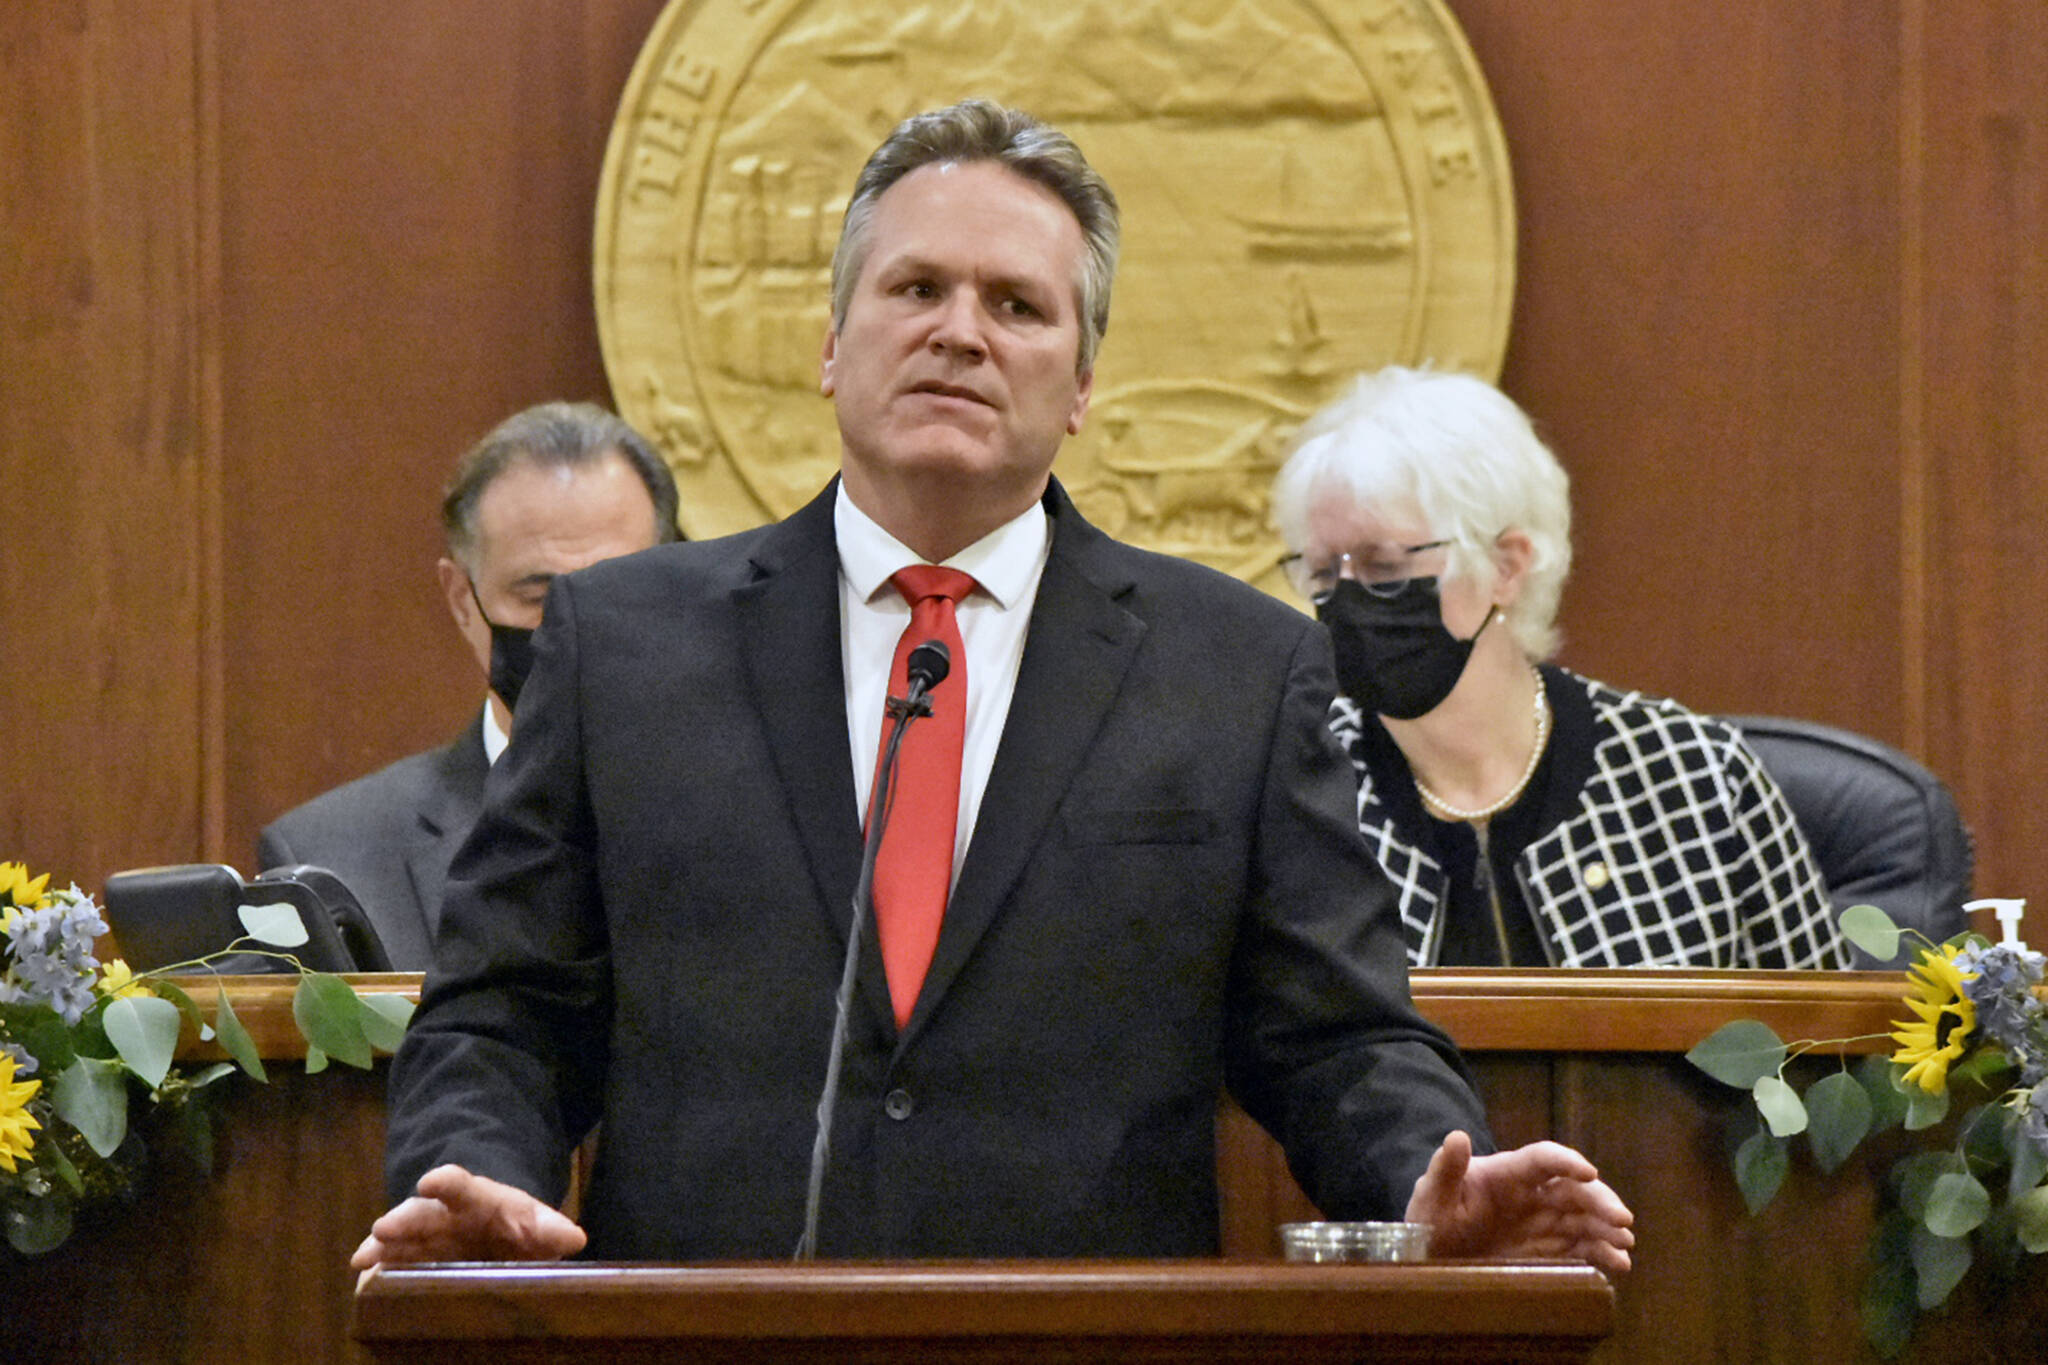 Gov. Mike Dunleavy speaks to a joint meeting of the Alaska State Legislature at the Alaska State Capitol on Tuesday, Jan. 25, 2022, for his fourth State of the State address of his administration. Dunleavy painted a positive picture for the state despite the challenges Alaska has faced during the COVID-19 pandemic and its effects on the economy. (Peter Segall / Juneau Empire)